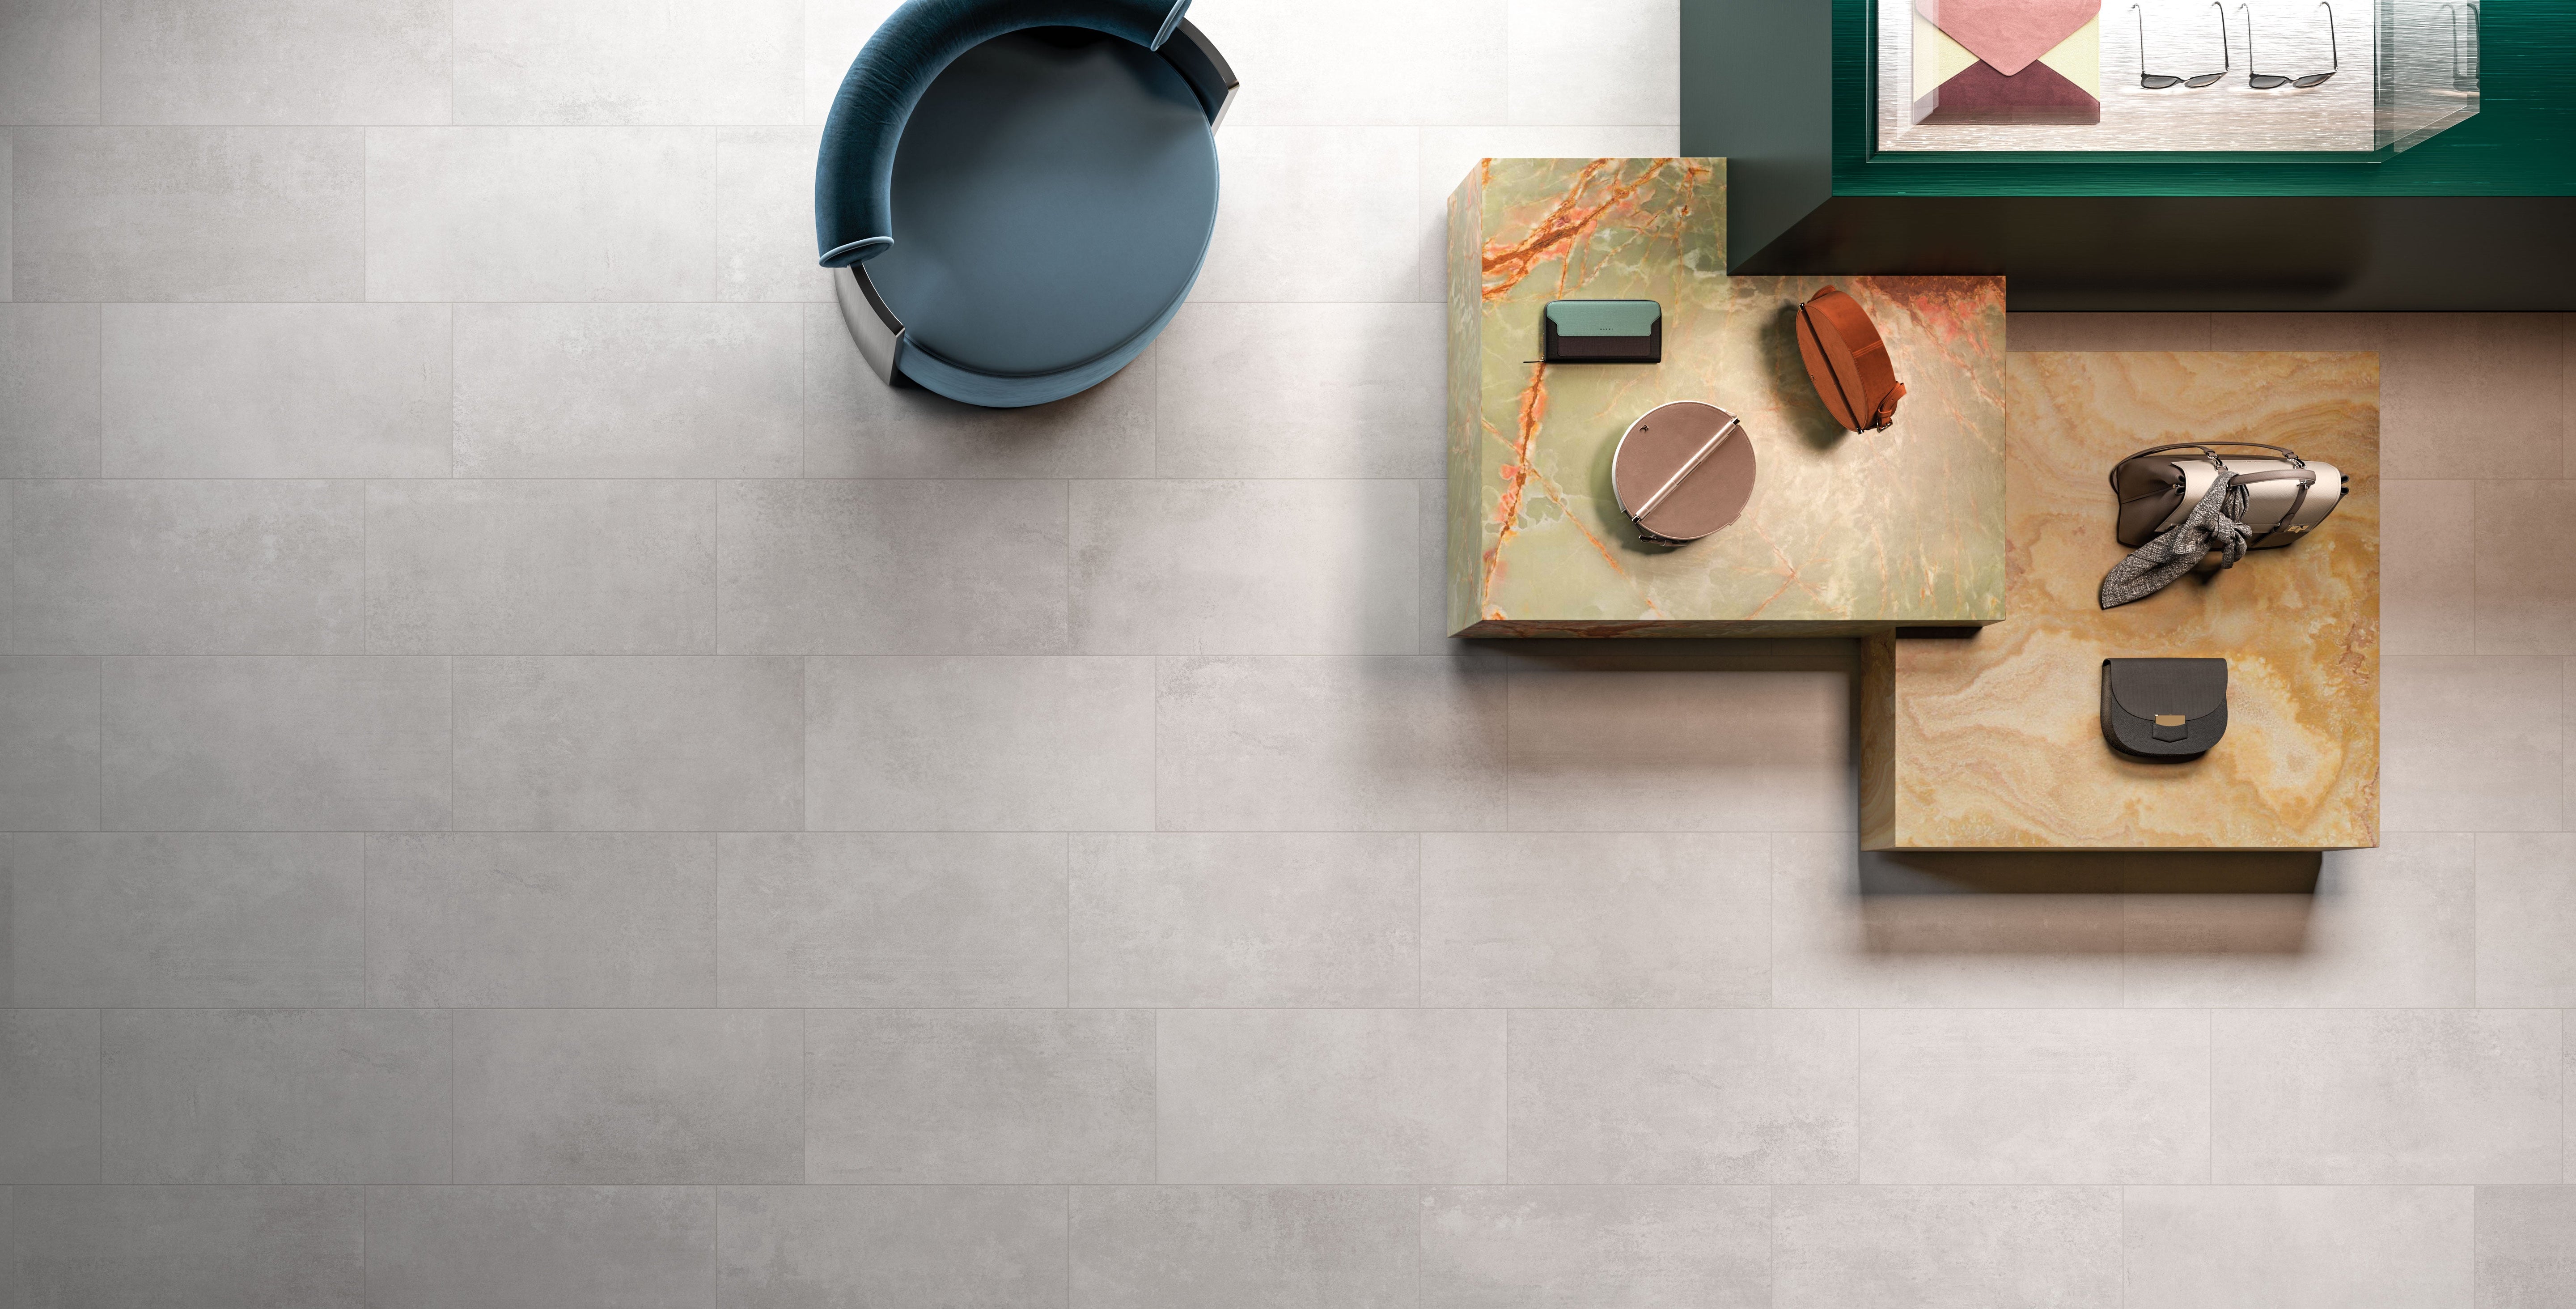 Porcelain tile collection from Surface Group featuring Portland series with neutral tones and modern design, displayed in a stylish interior setting with decorative accents.